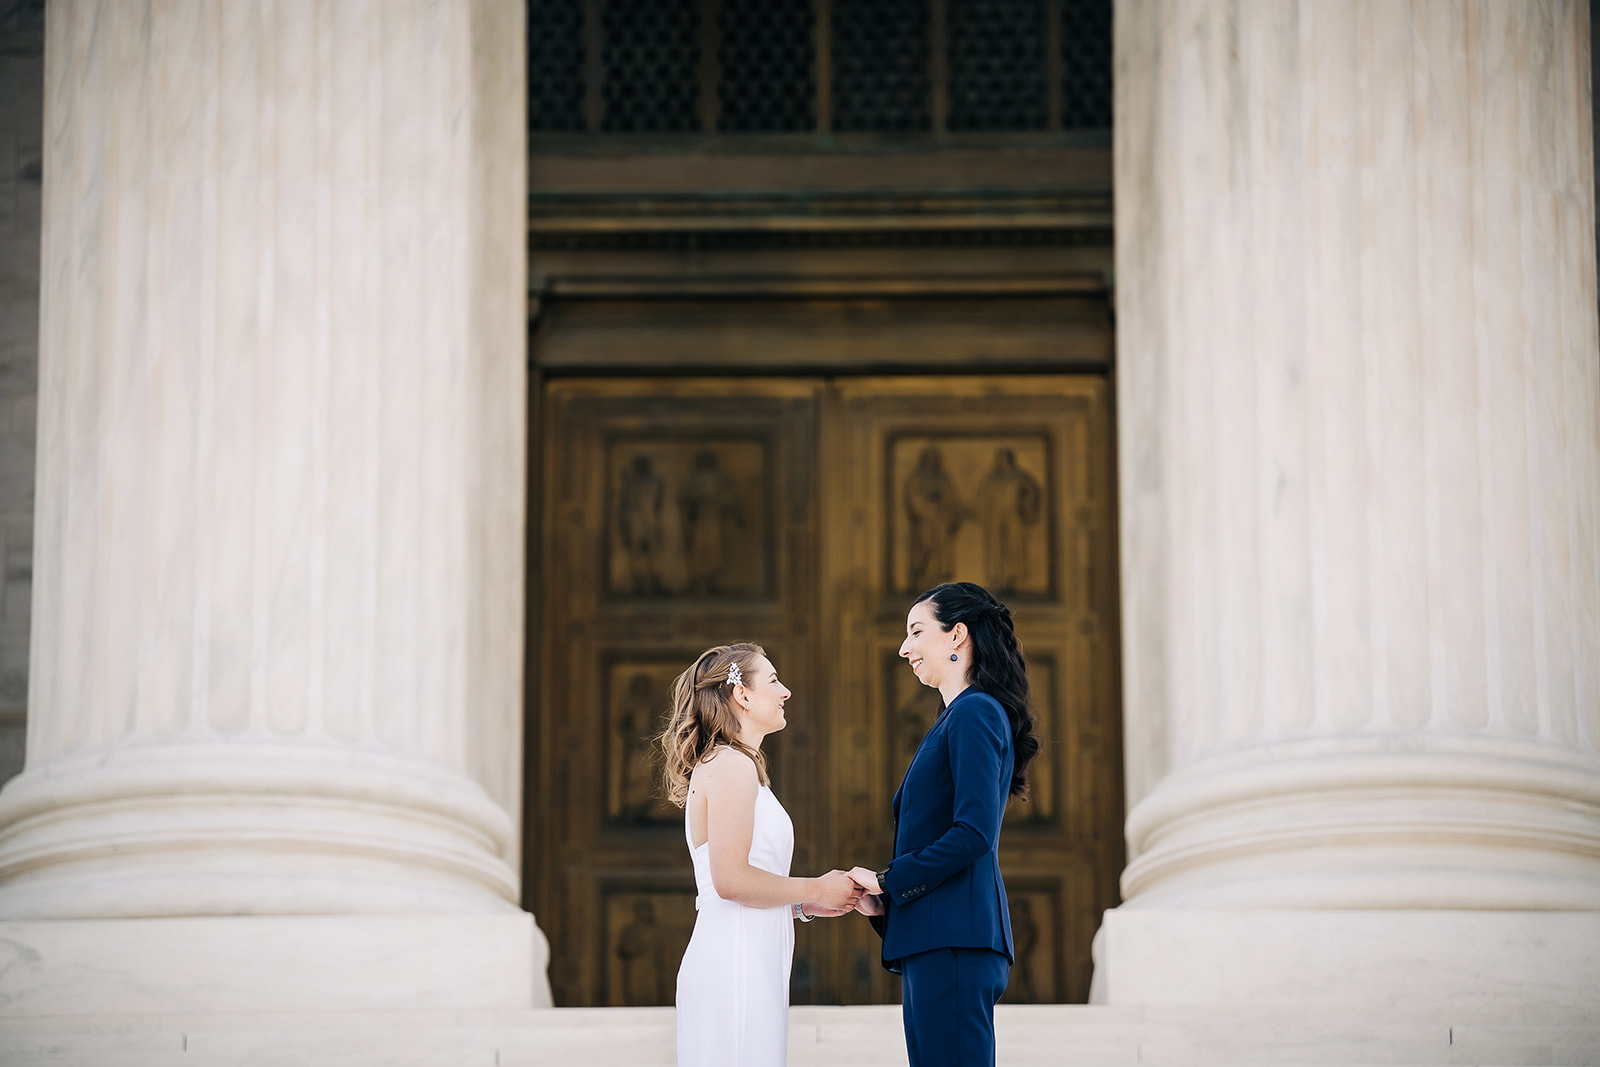 How to find a marriage proposal photographer in Washington DC